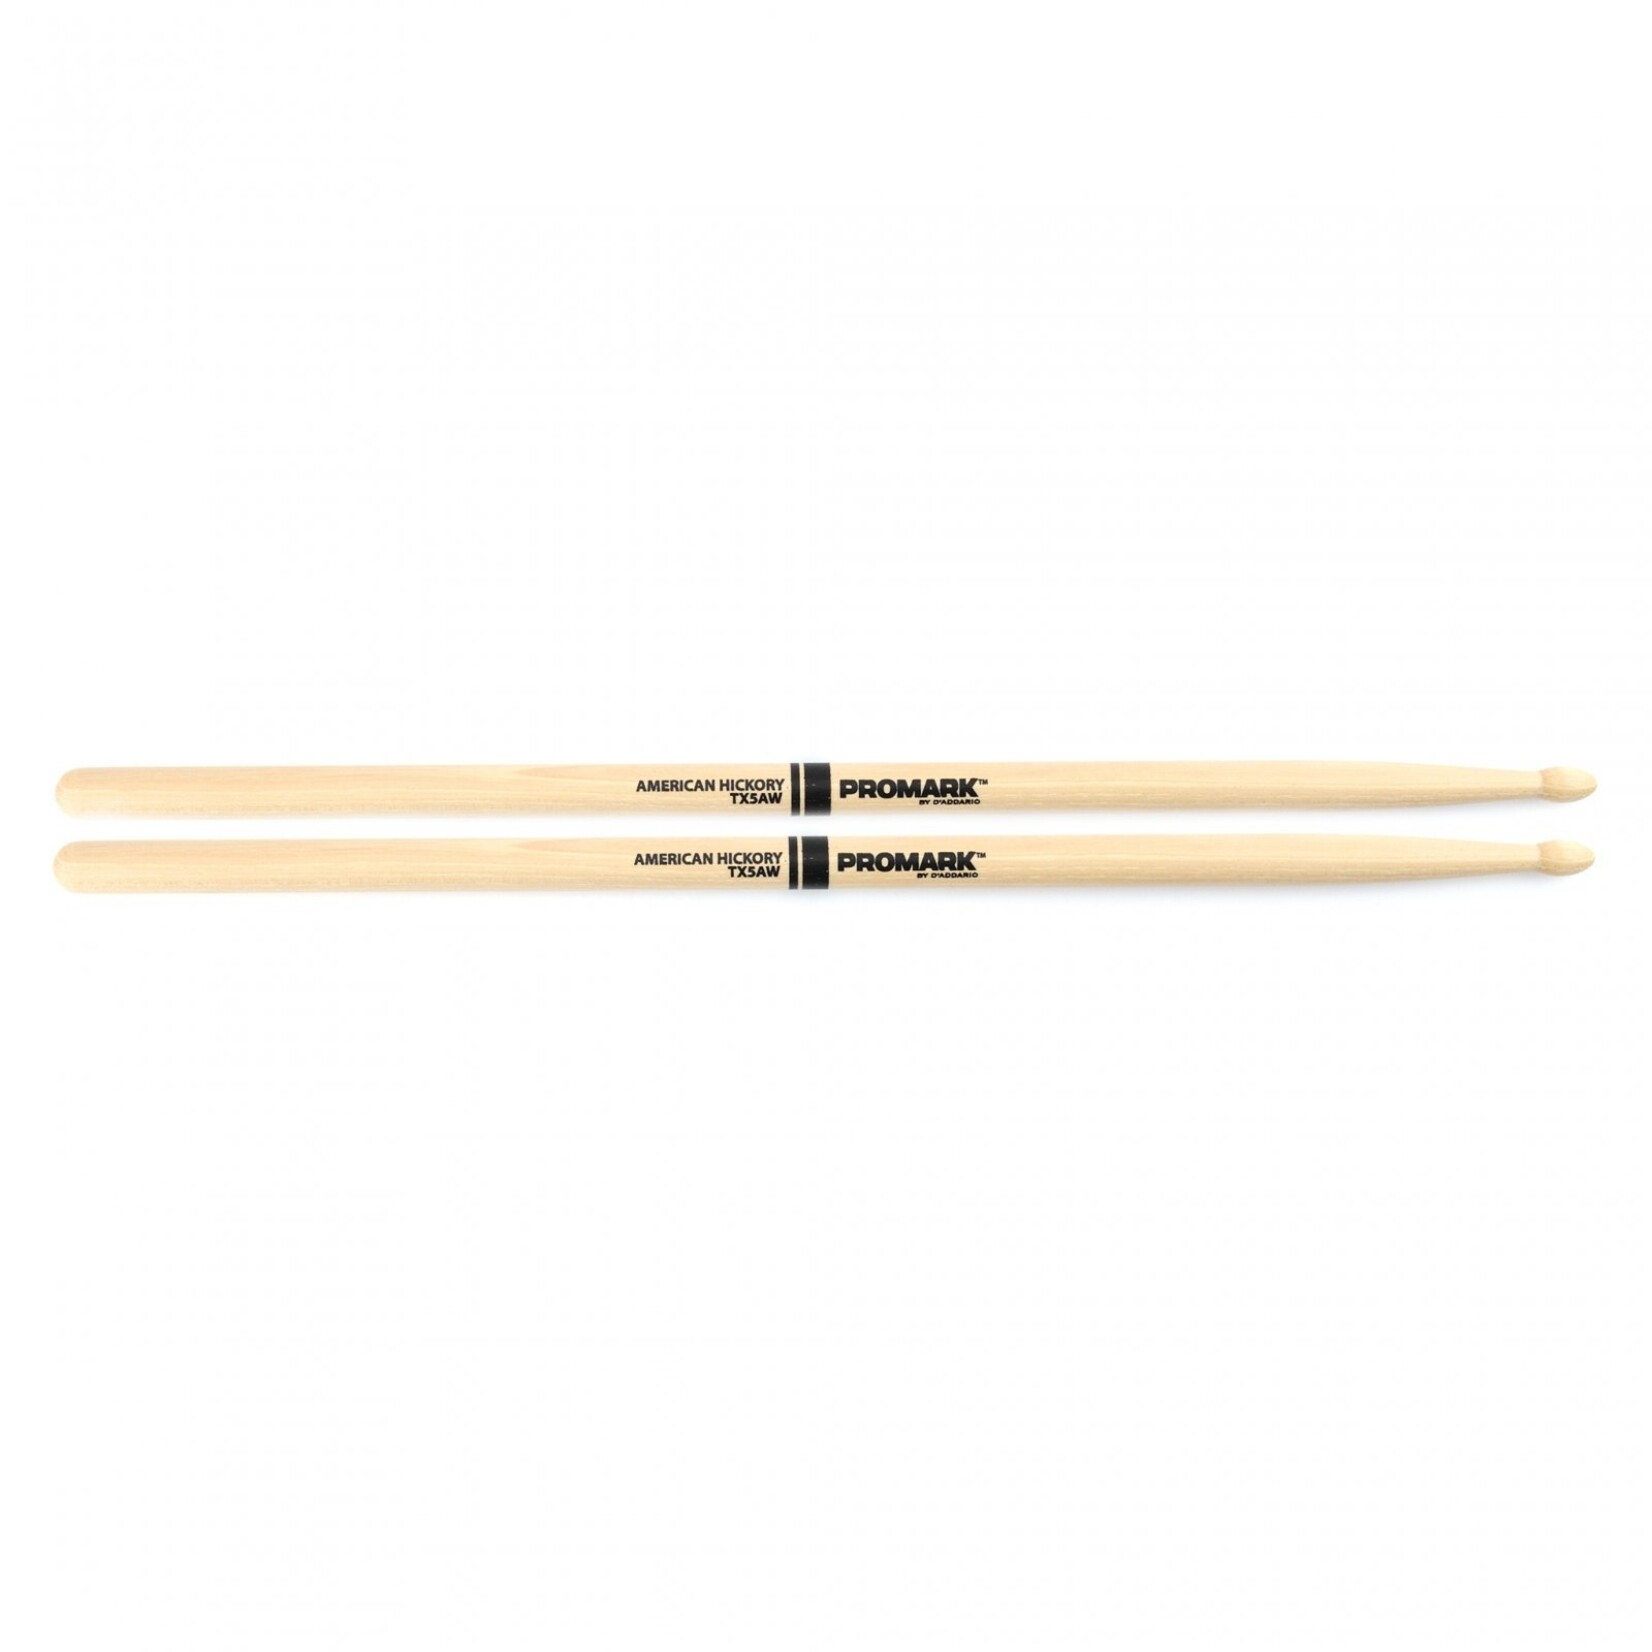 ProMark ProMark Hickory 5A Wood Tip drumstick